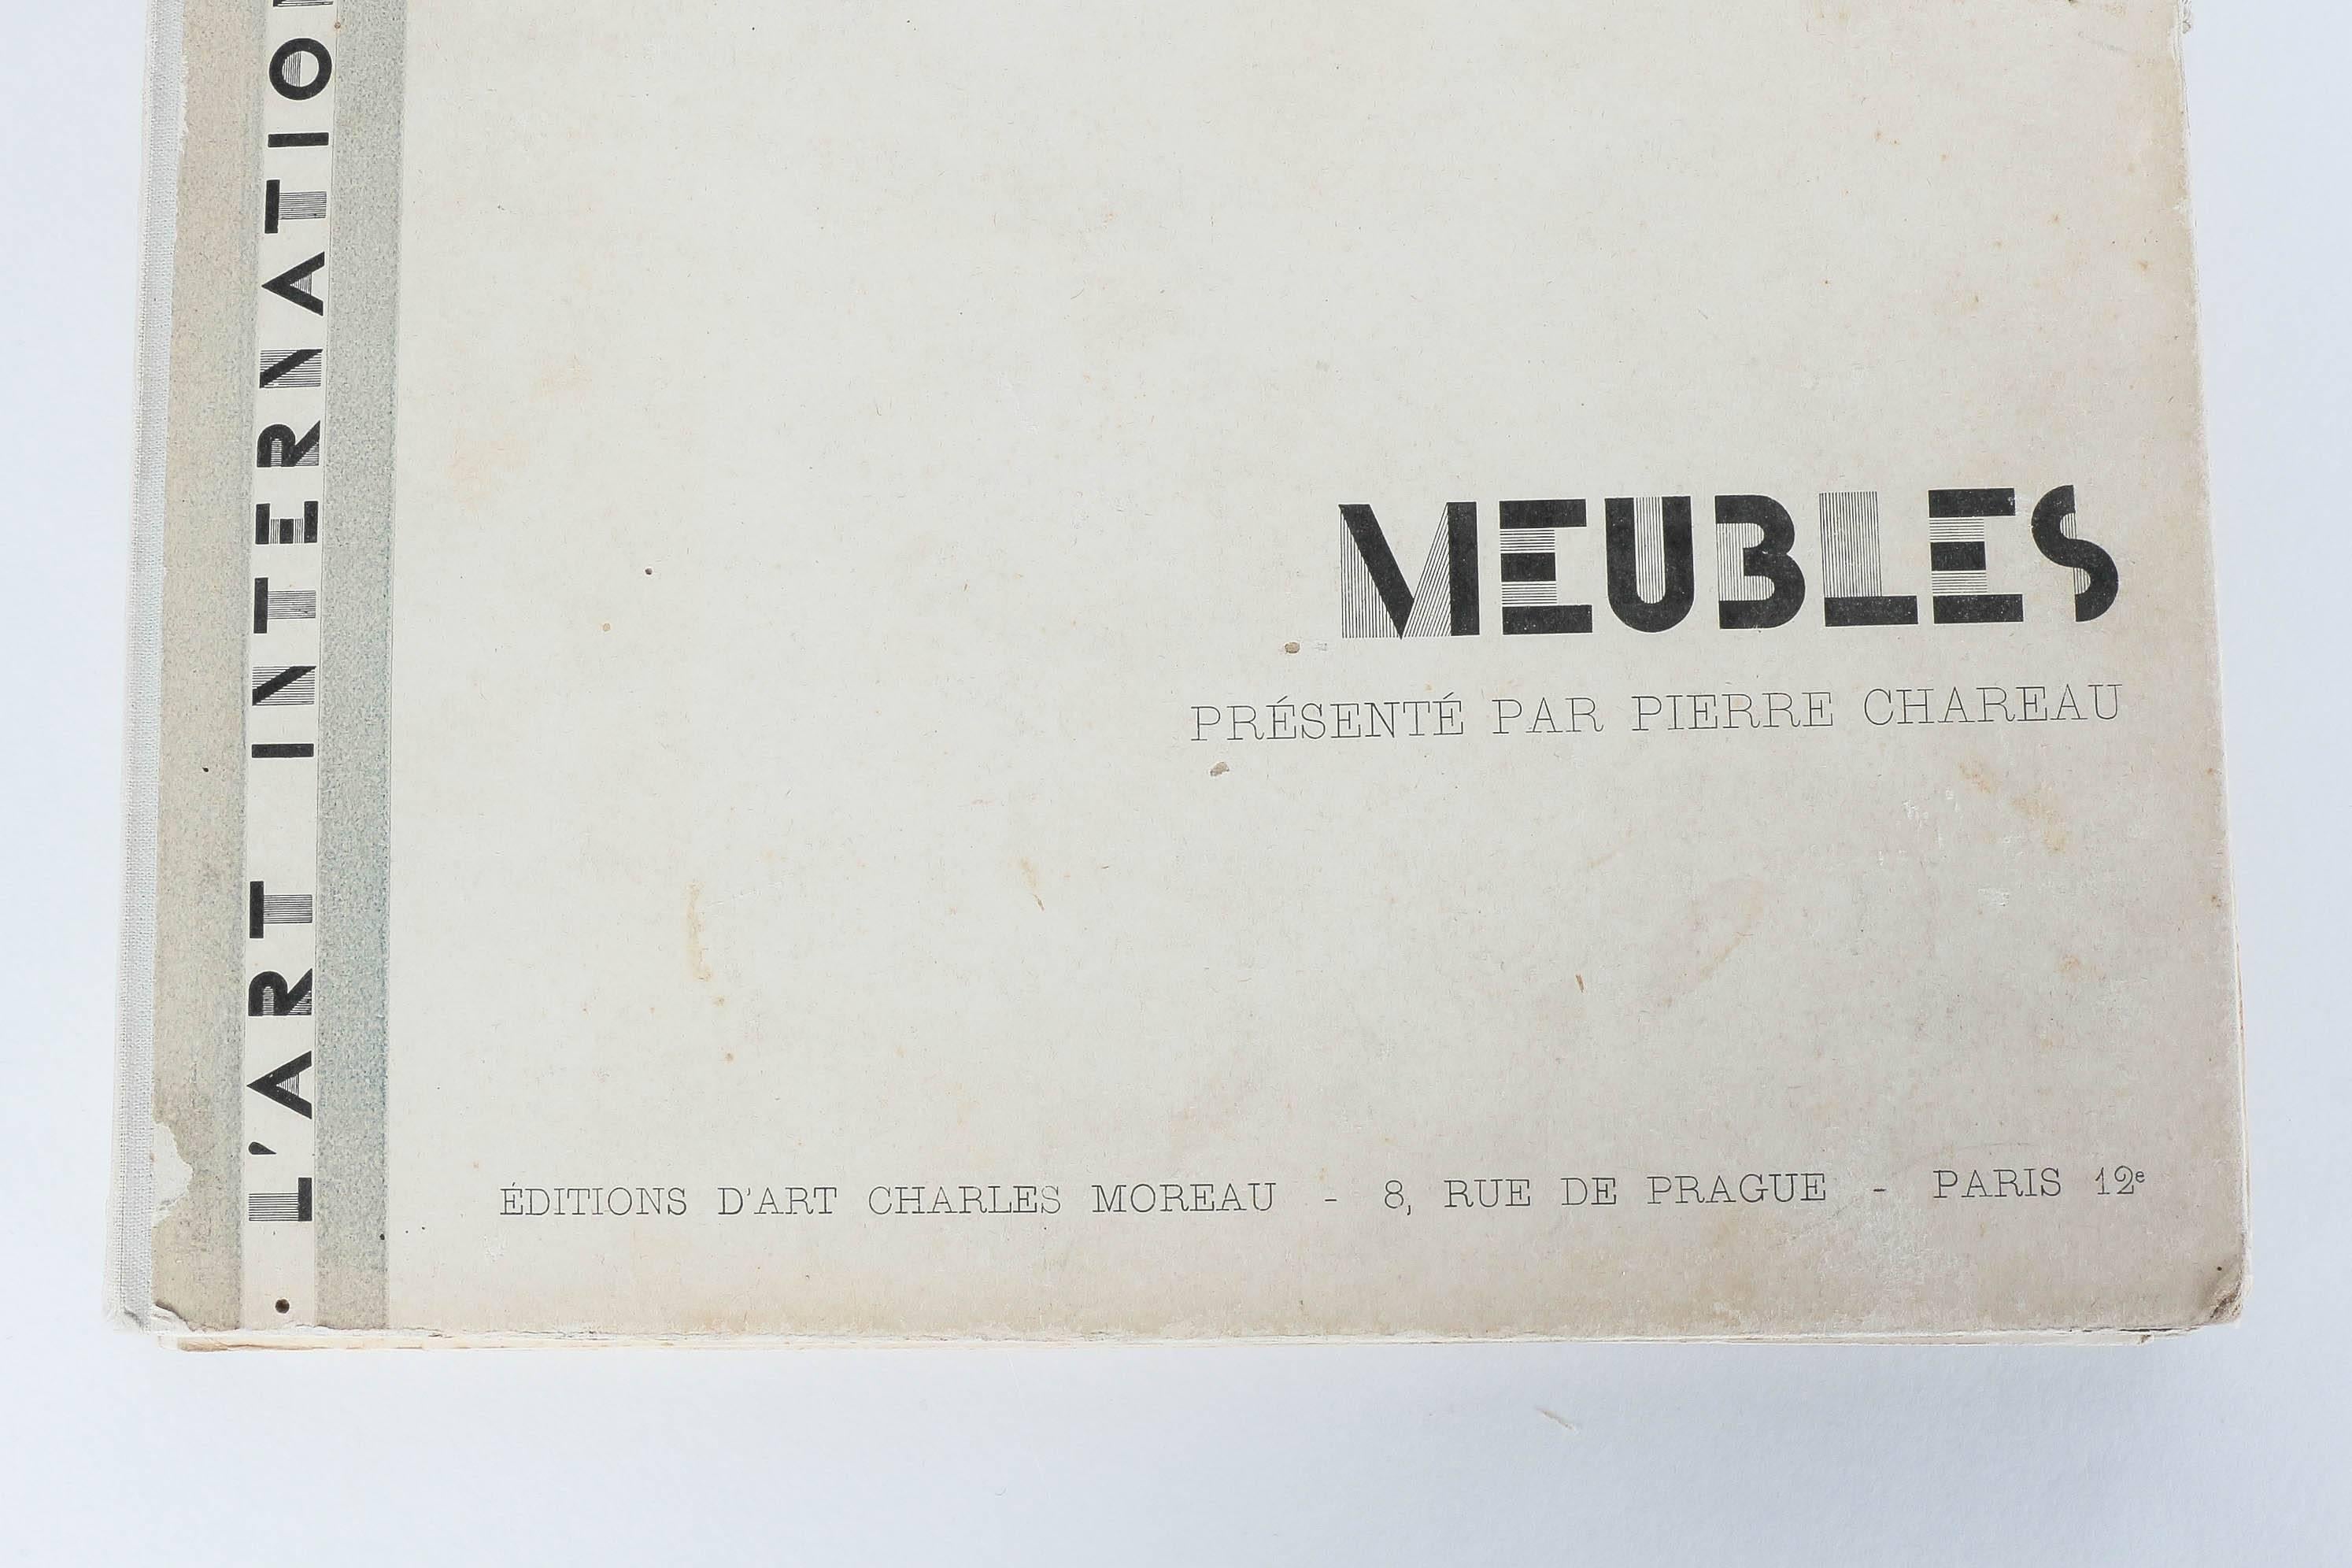 Extremely rare and beautiful portfolio Meubles présenté par Pierre Chareau, Éditions D'Art Charles Moreau - 8 Rue De Prague - Paris 12eme.

Compiles 50 loose stiff boards with interior furnishings by the most famous architects of the time, such